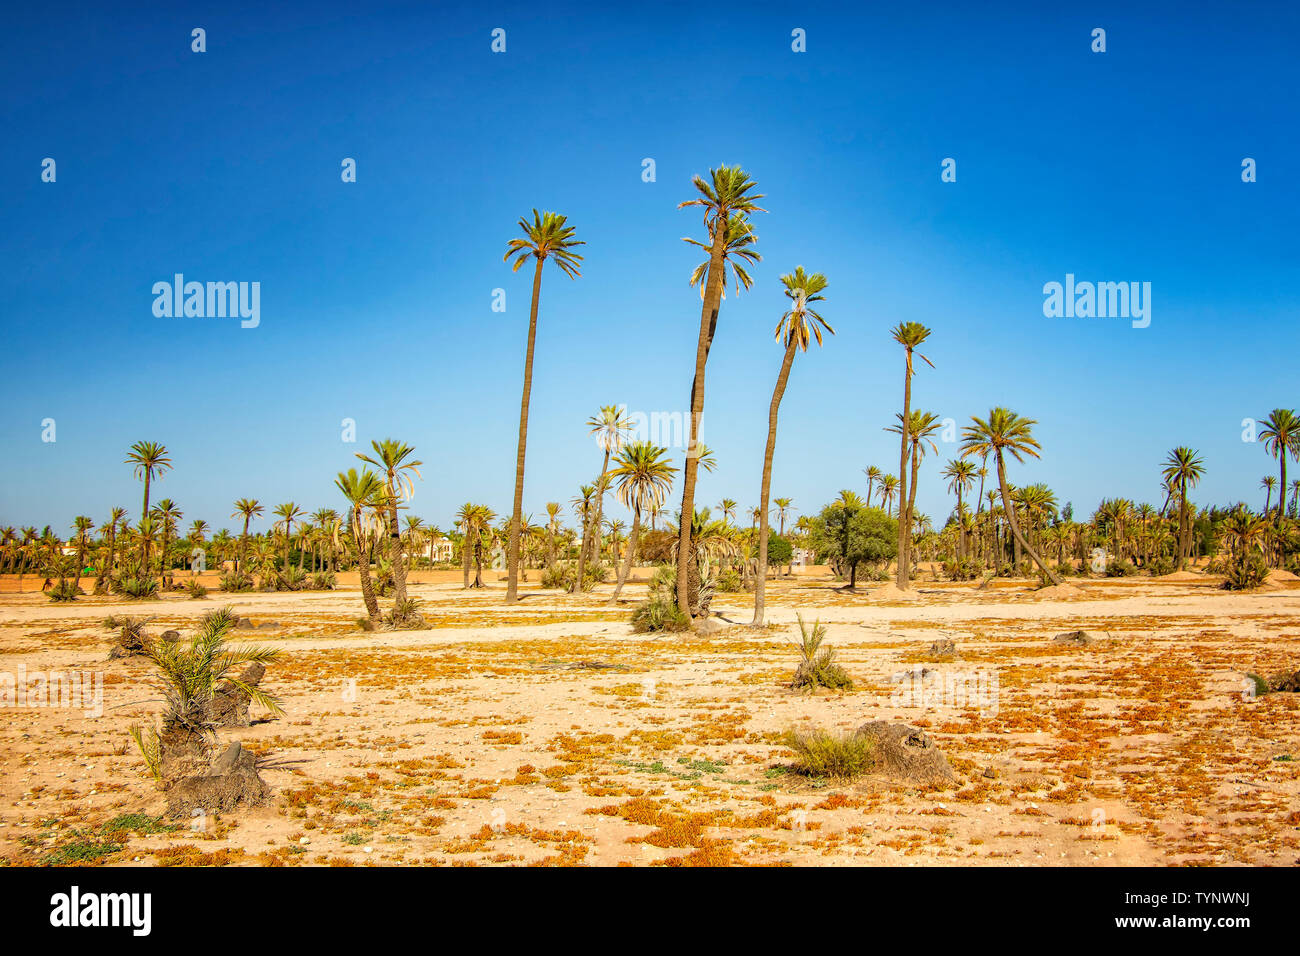 Palm trees standing in a desert in a Palmeraie, Marrakesh. It is nature background of Morocco, Africa. There is blue sky is in the background. Stock Photo